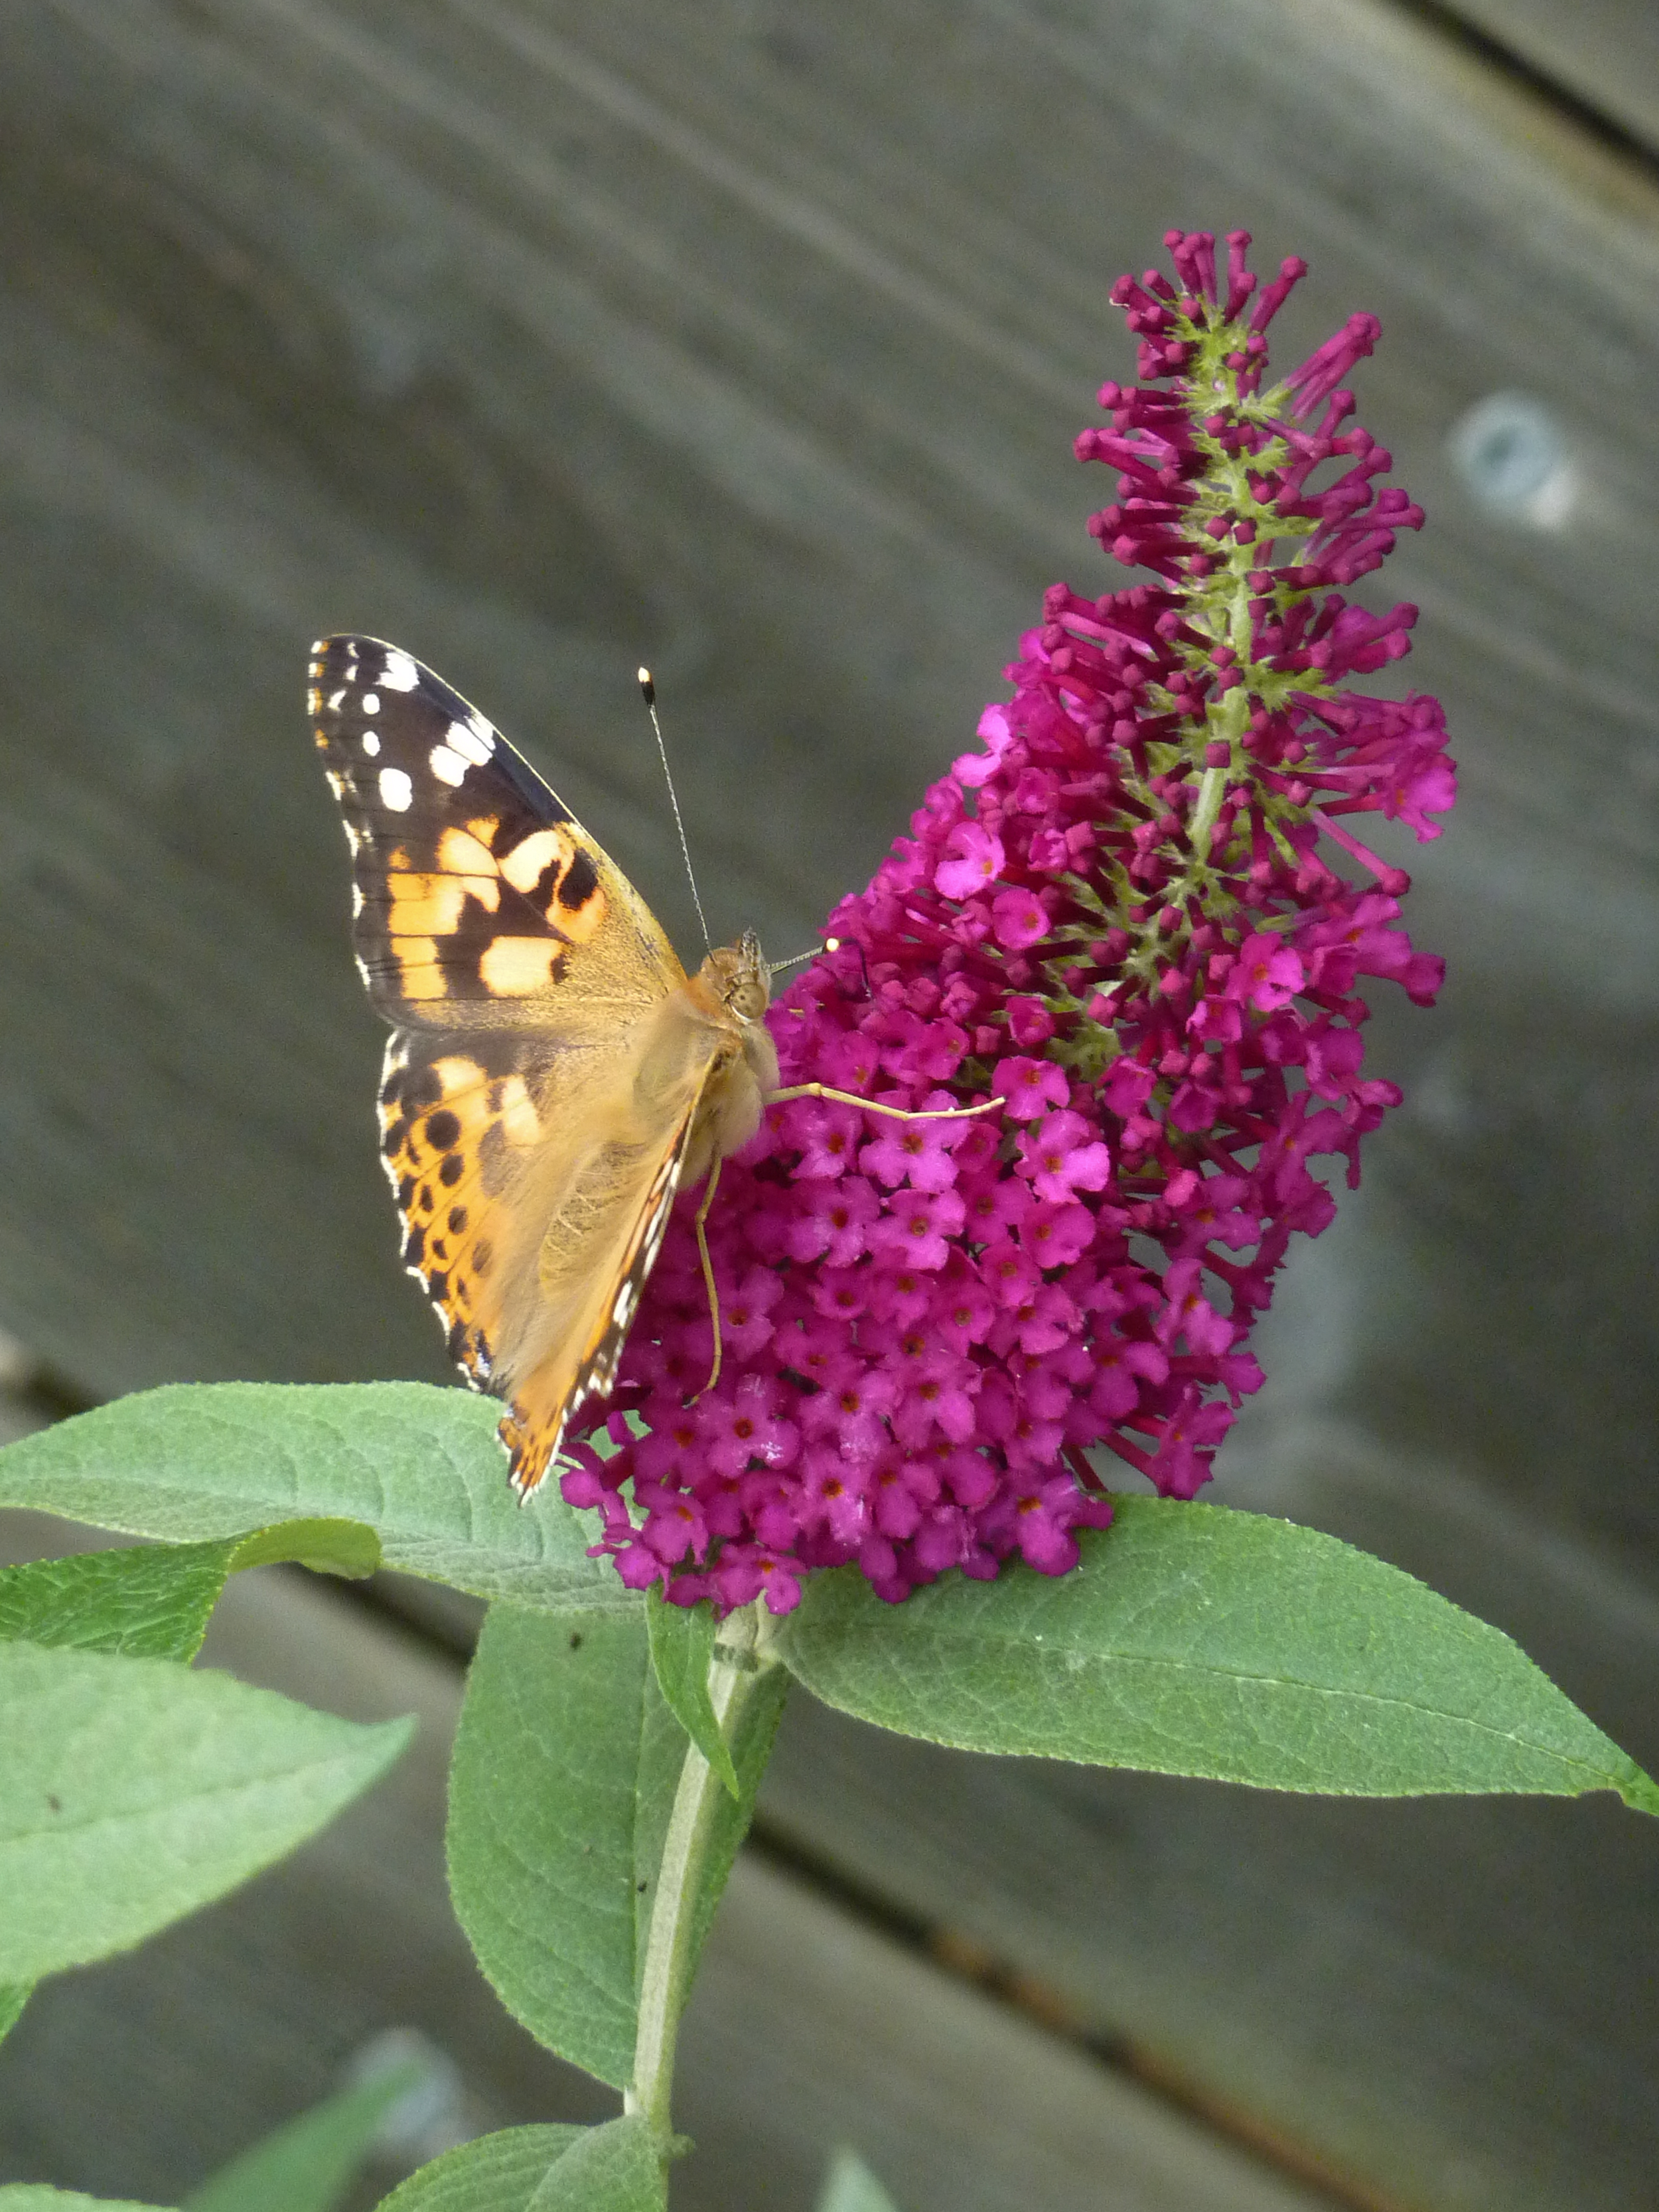 THE PAINTED LADY - September 2019